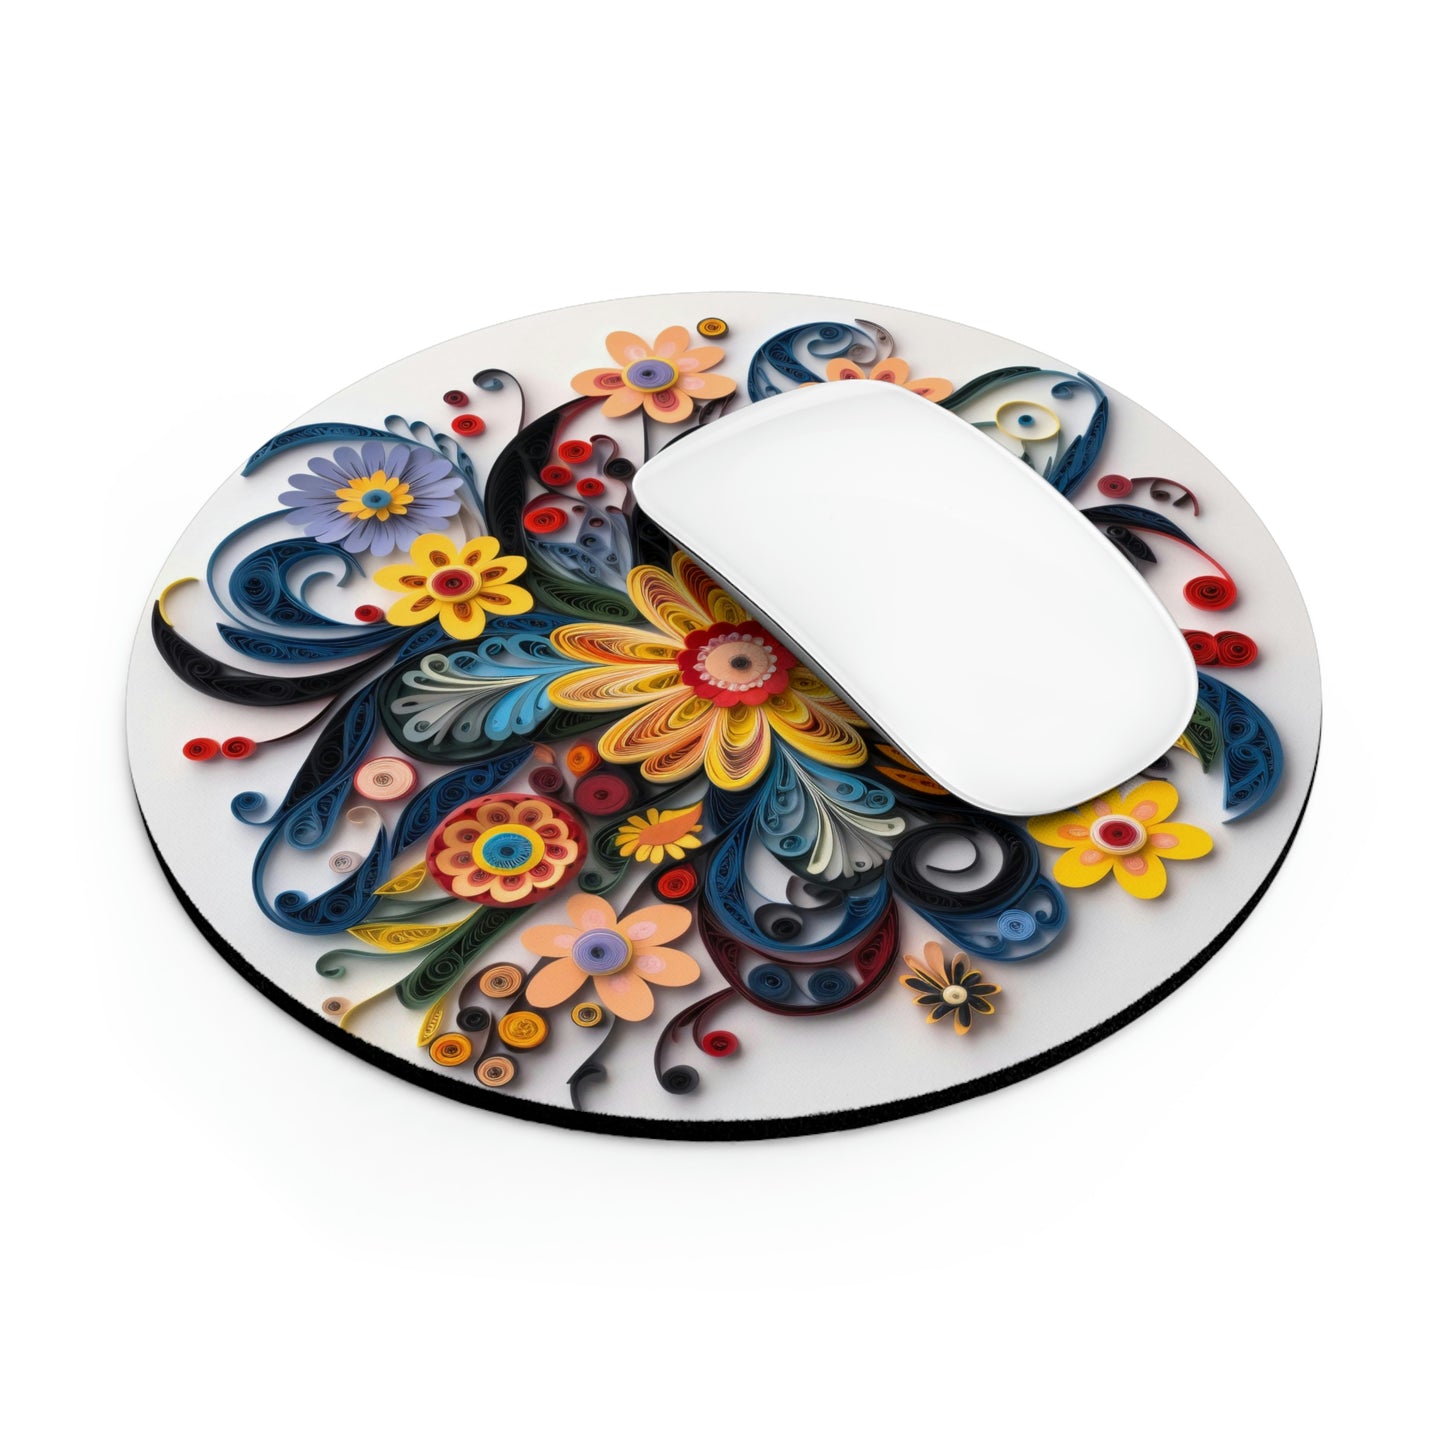 Folk Art Decorative Rosemaling Paper Quilling Mouse Pad (1) 2 Shapes